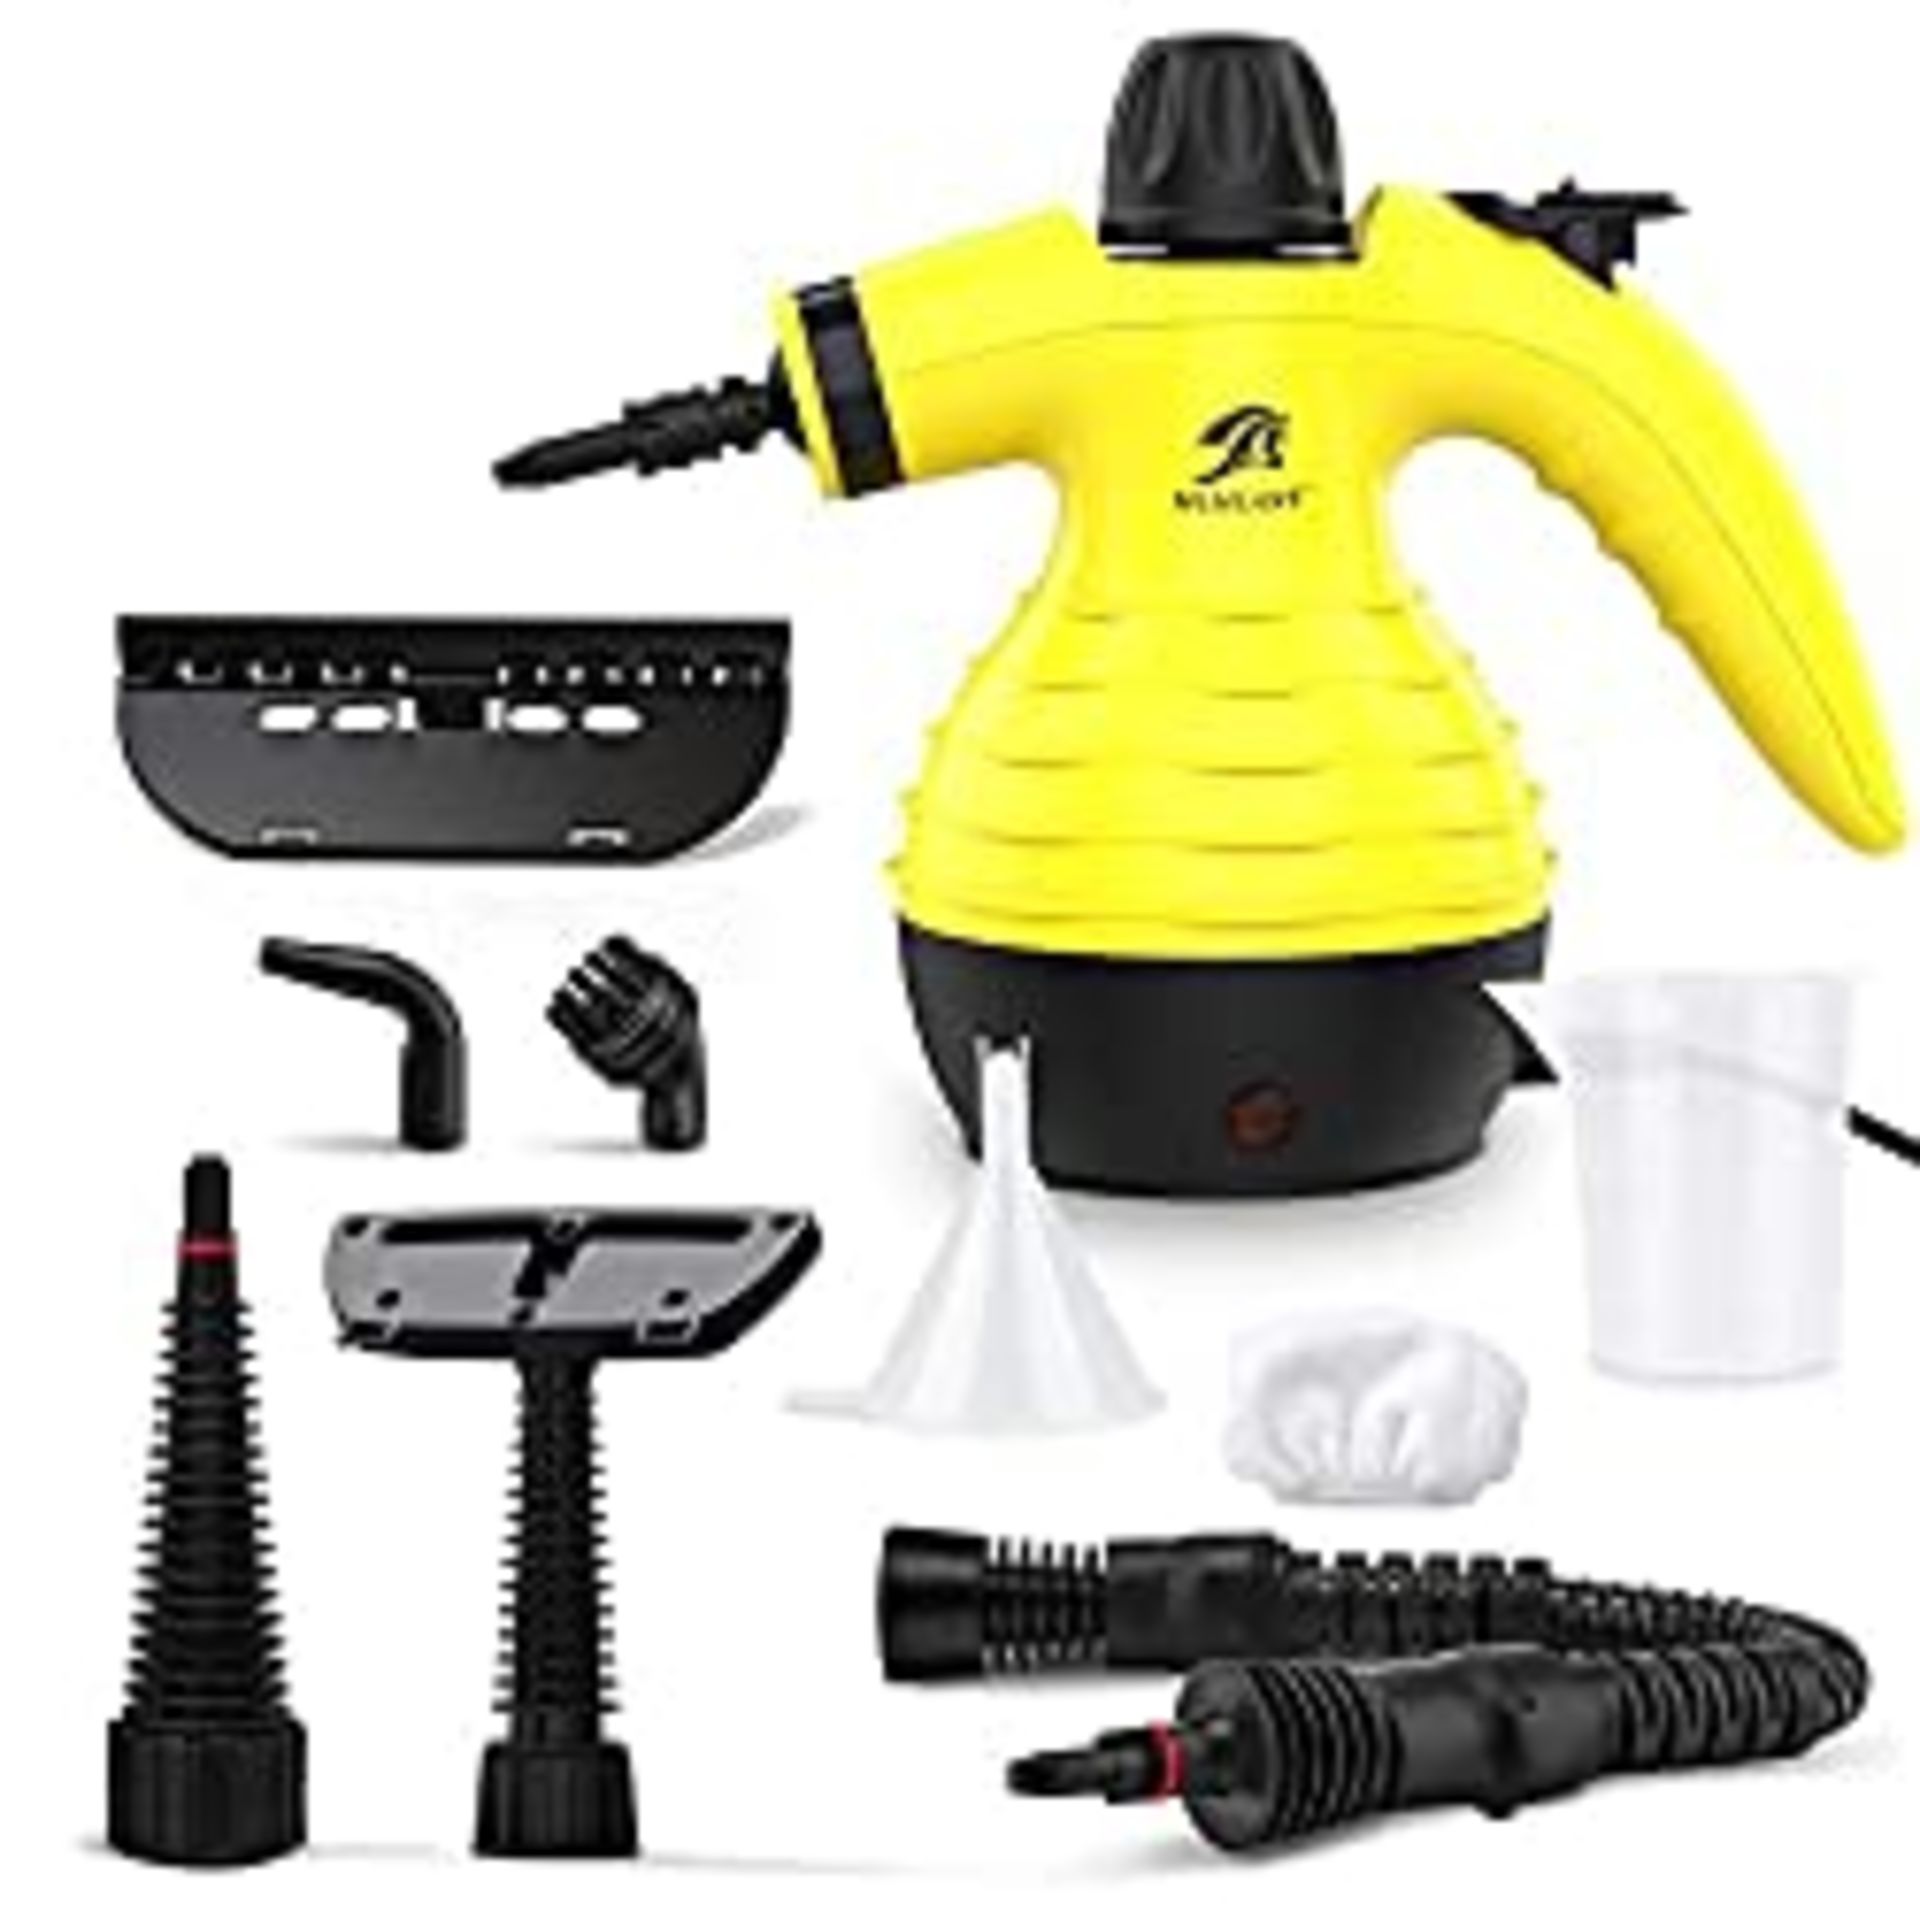 RRP £33.98 MLMLANT Hand Held Steam Cleaners For Cleaning The Home